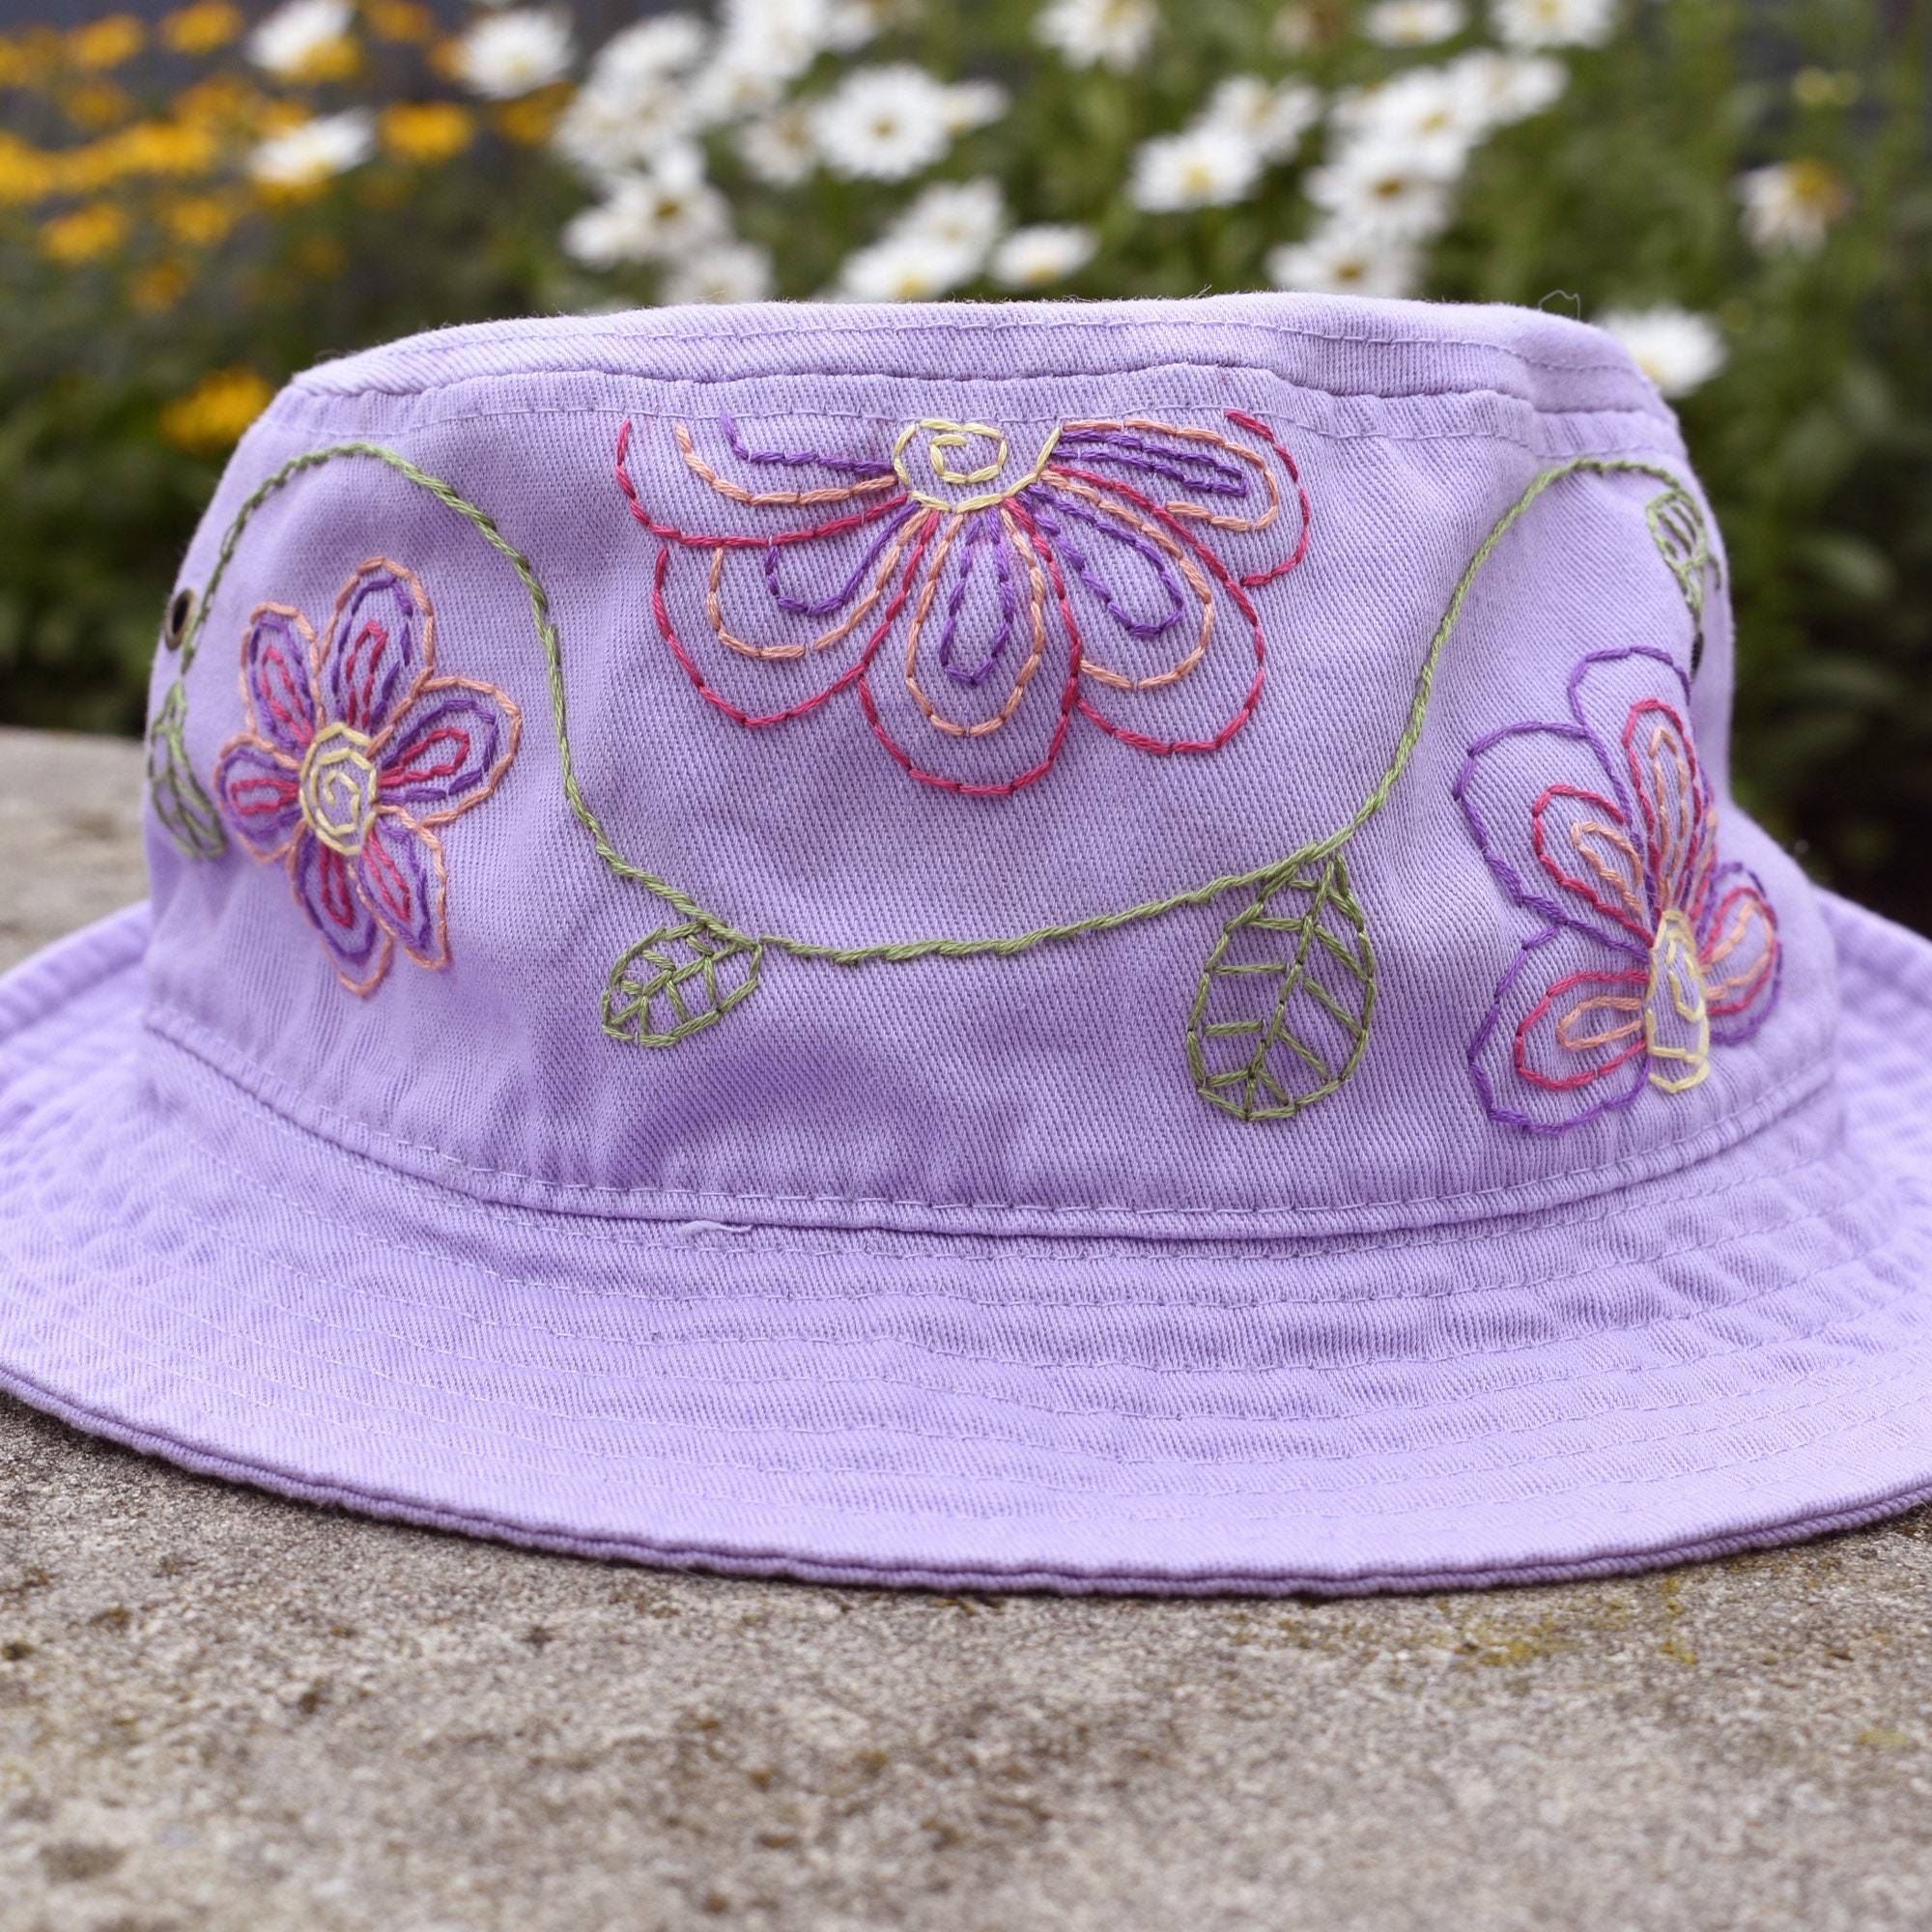 Boho Floral Bucket hat, Hand Embroidered - Ready To Ship - size L/XL -  Lavender fitted bucket hat - 100% cotton